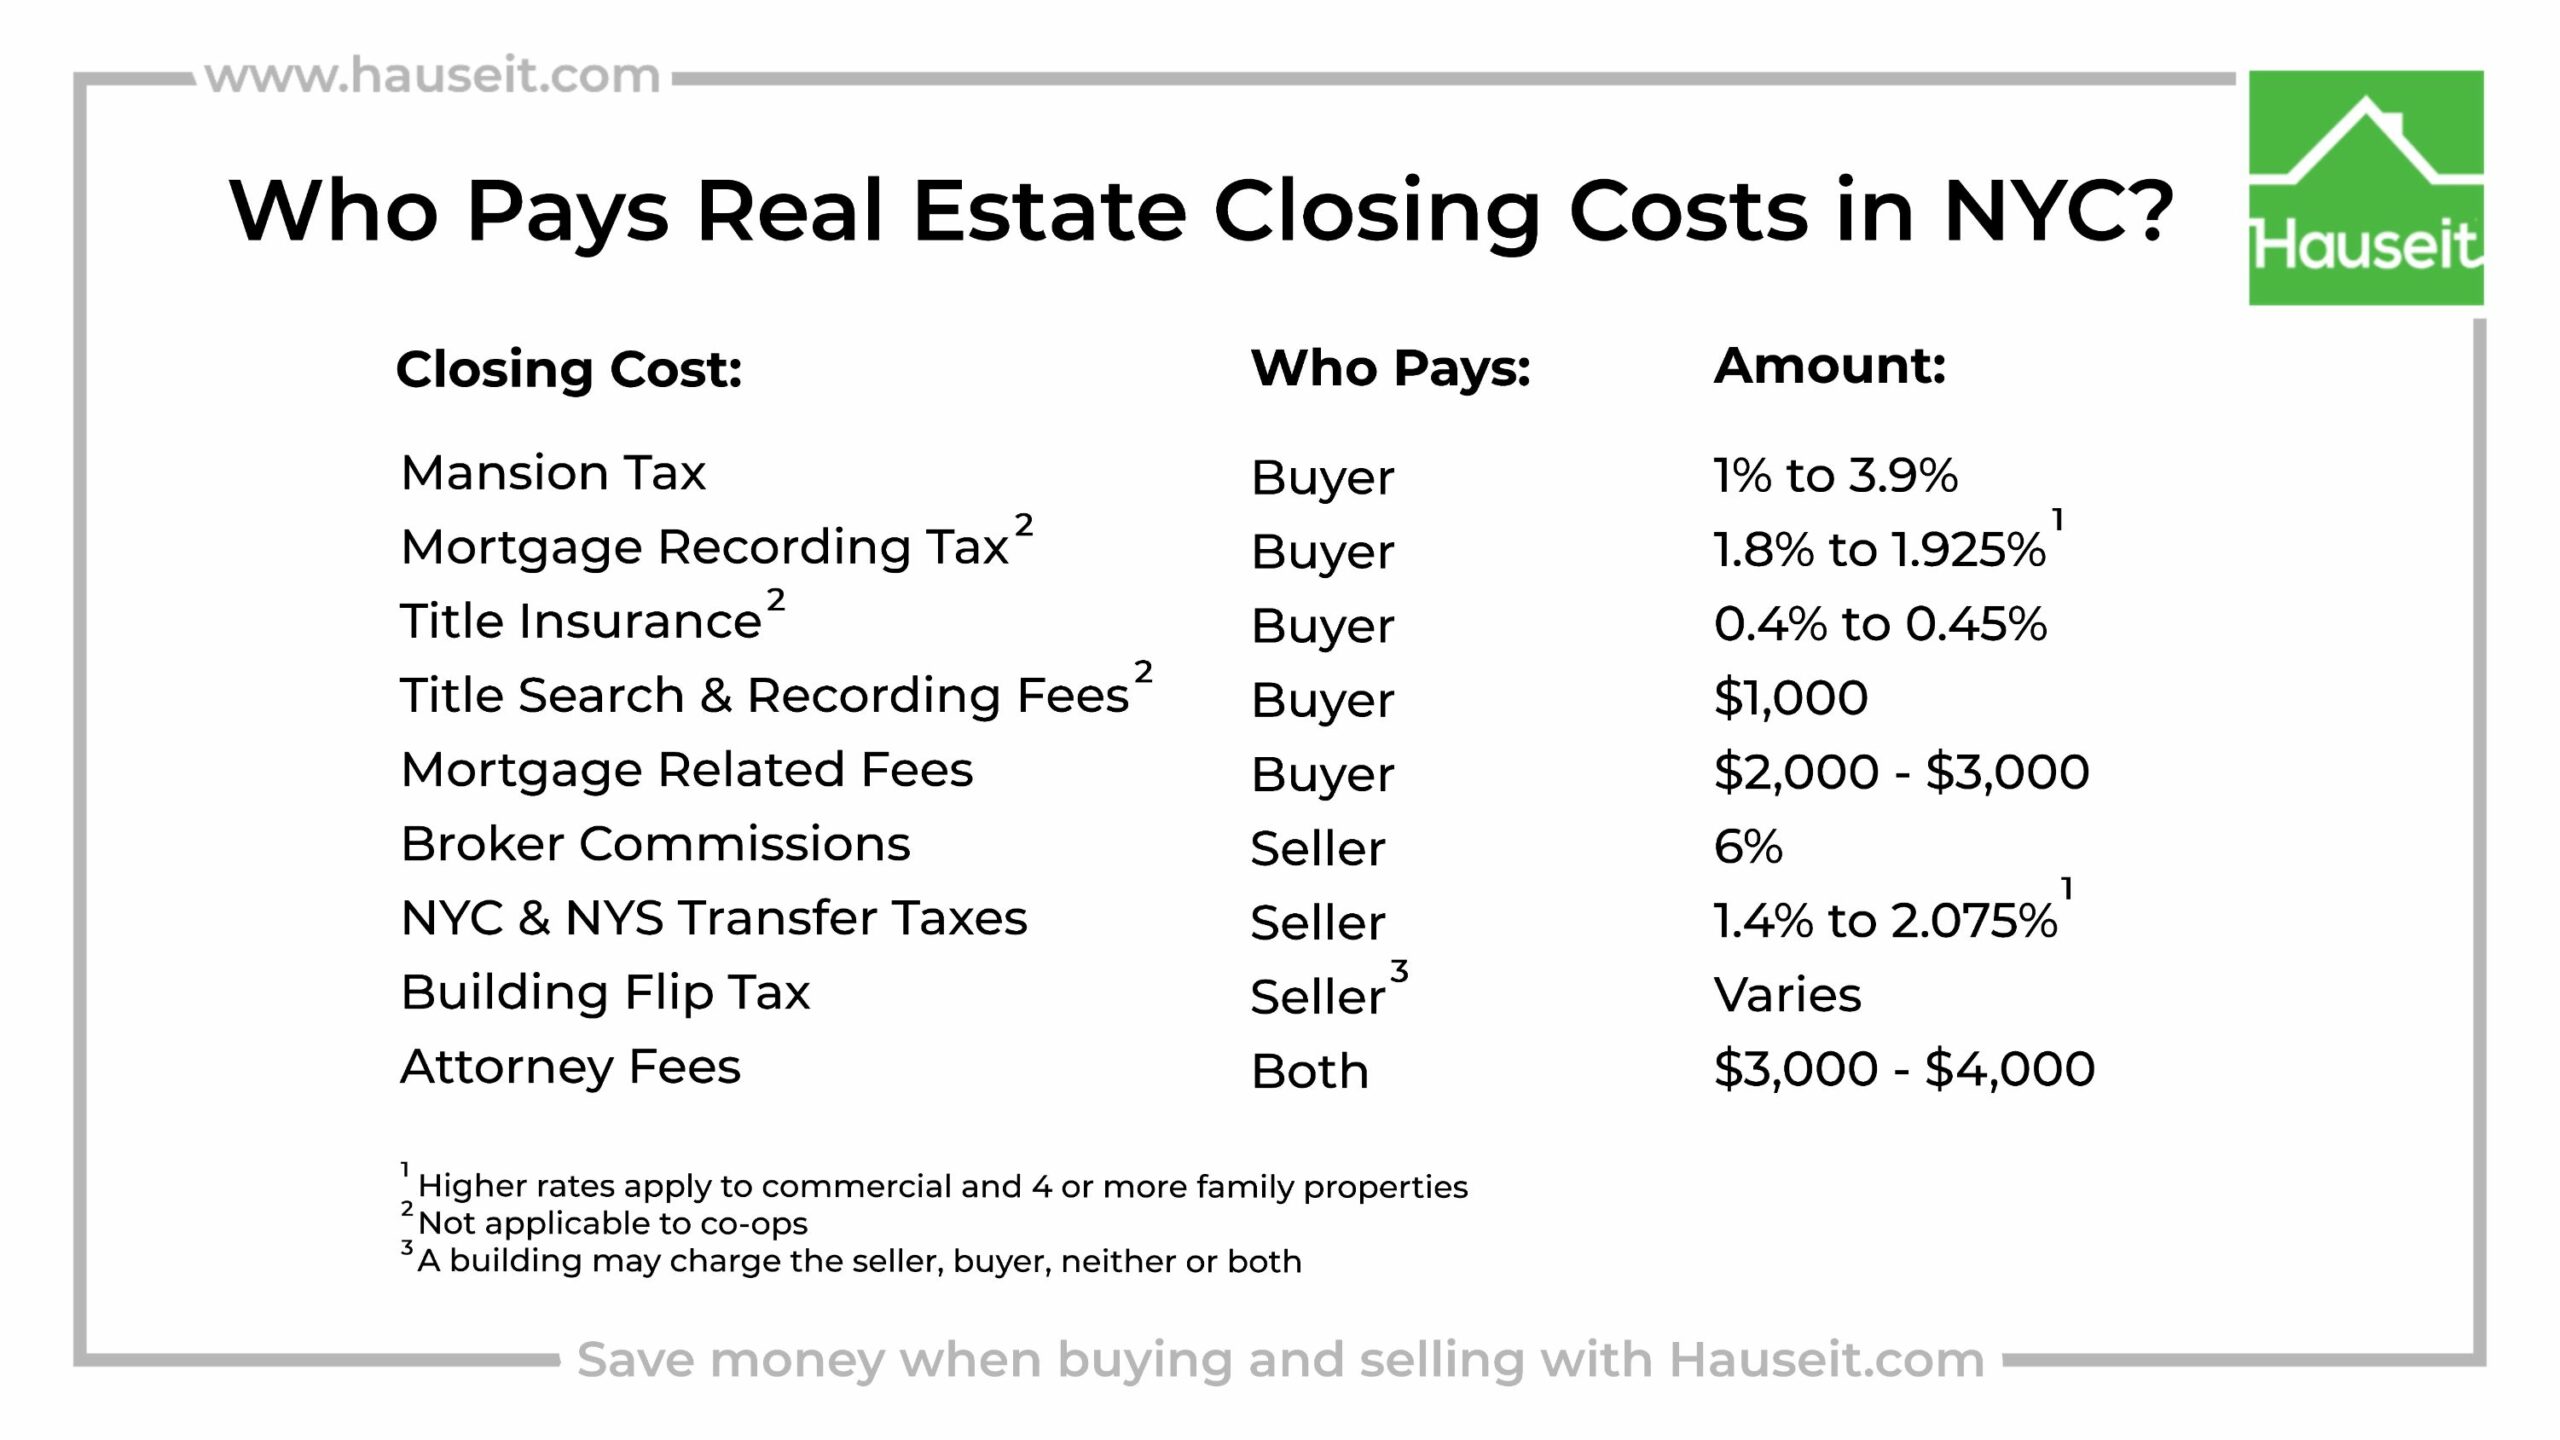 Buyer and seller pay specific closing costs in NYC. Sellers pay NYC & NYS Transfer Taxes and buyers pay Mansion & Mortgage Recording Taxes.